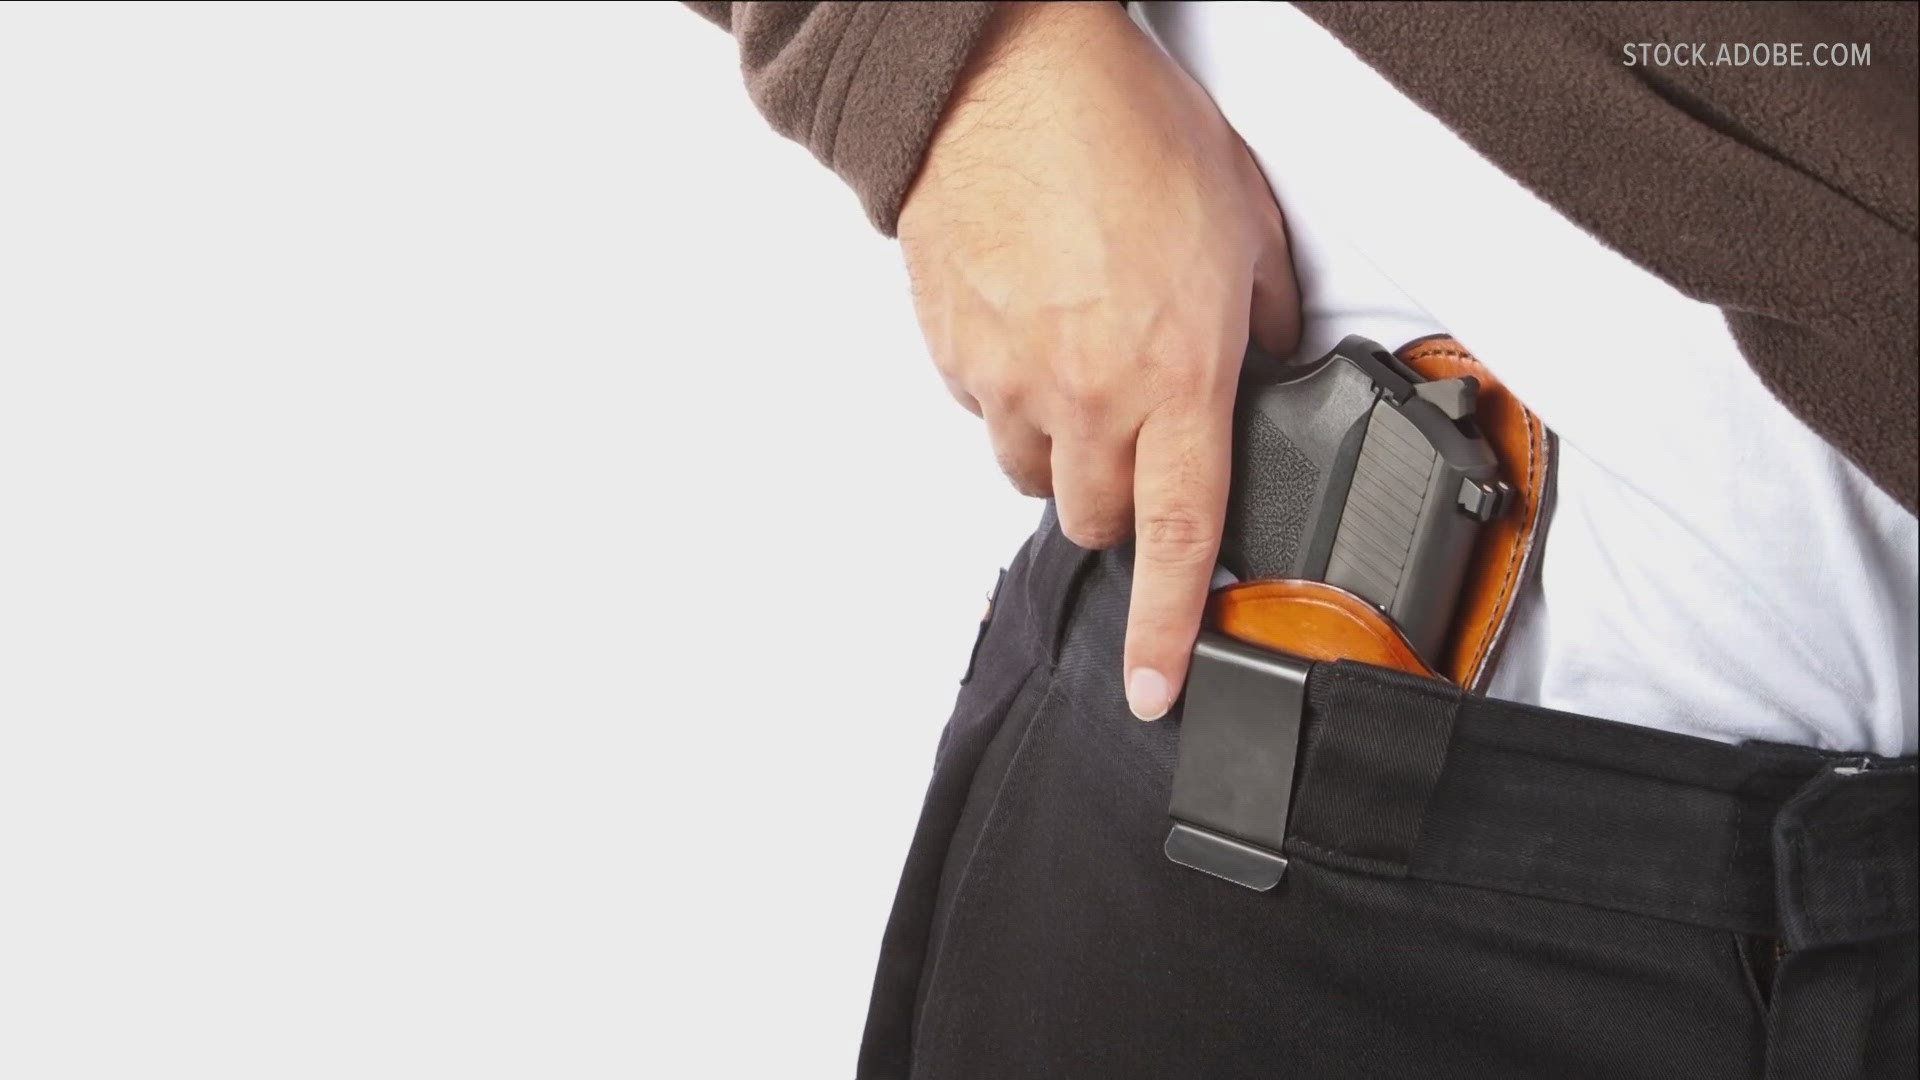 Supreme Court ruling could impact NY concealed carry gun law